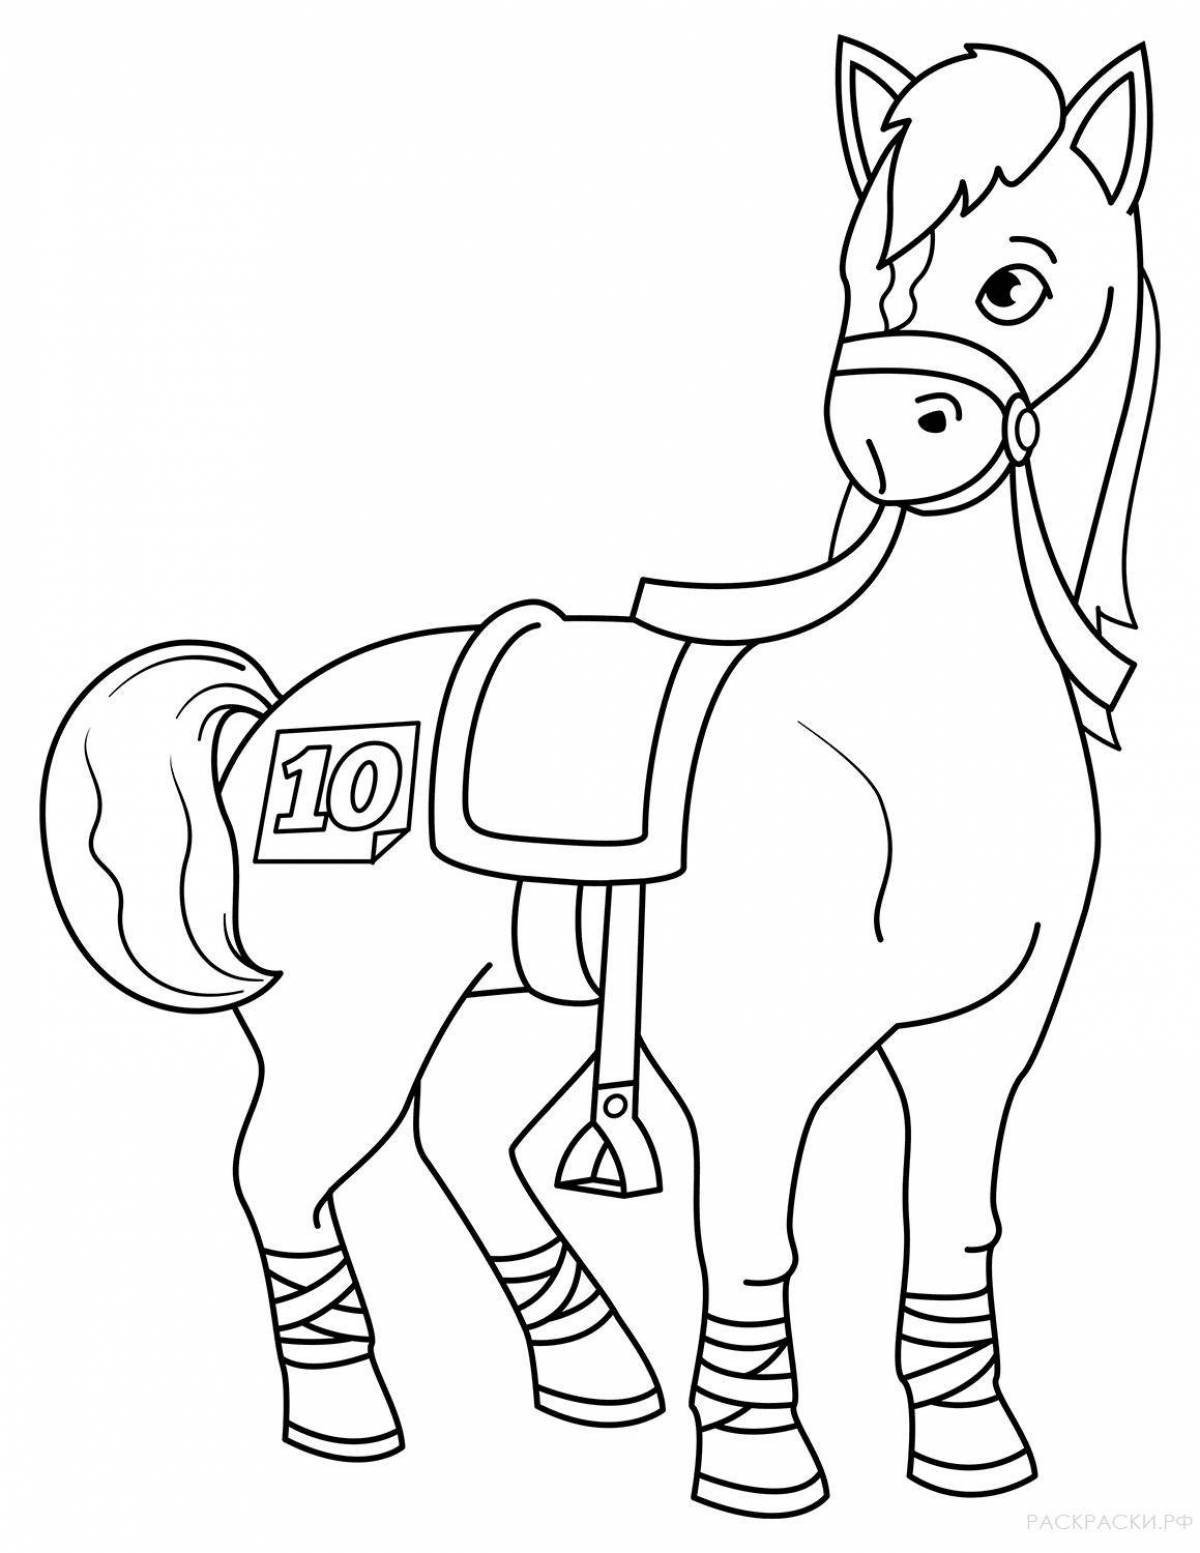 Fun horse coloring pages